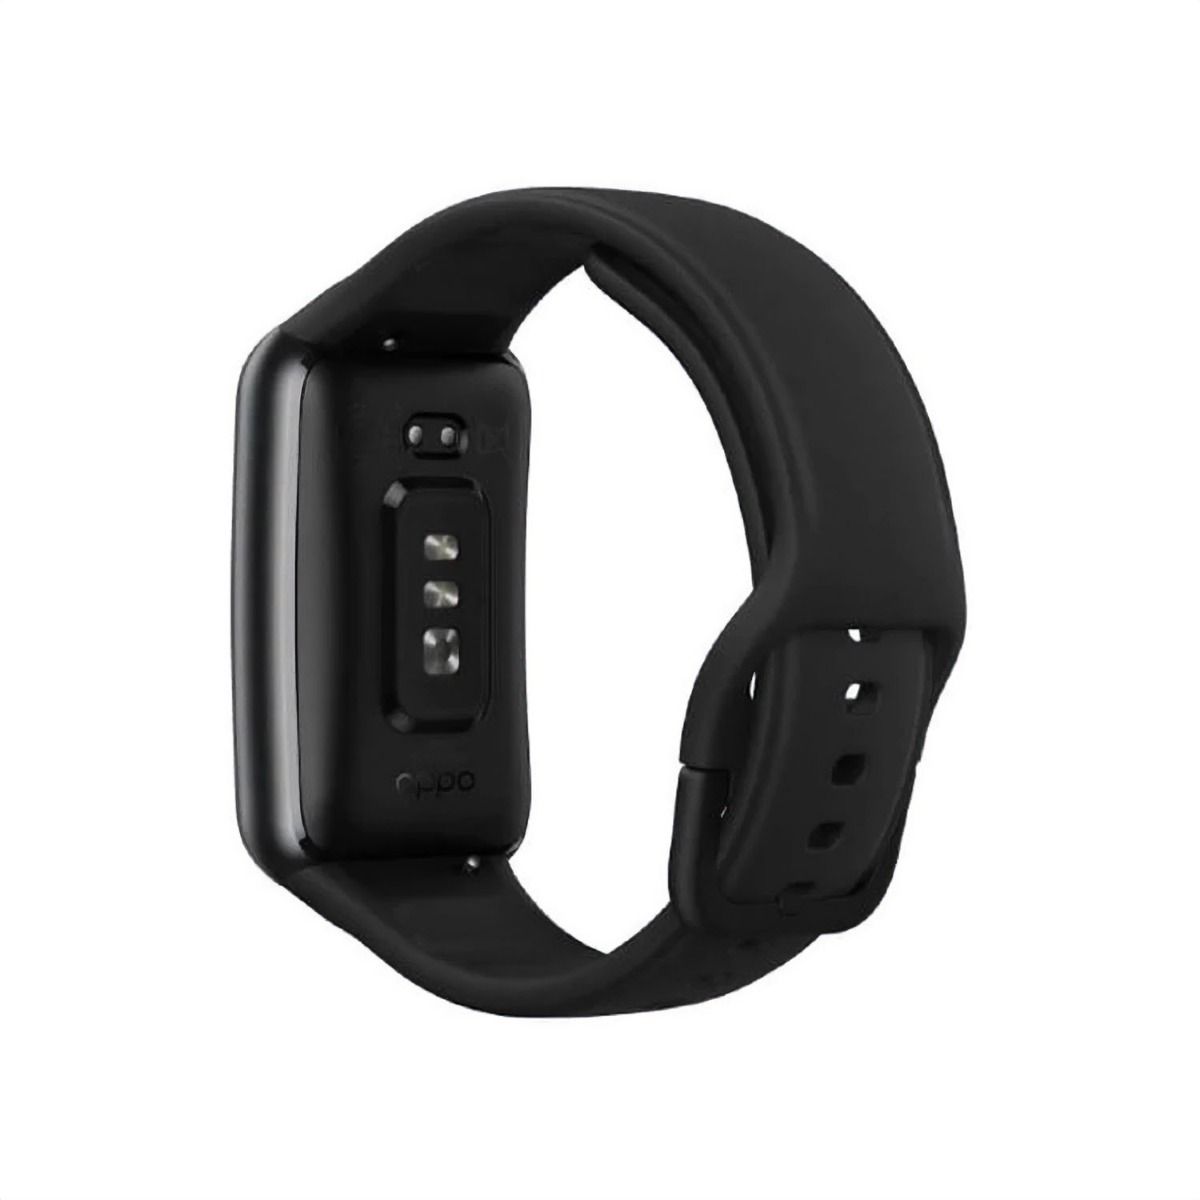 OPPO Watch Free 46mm Black AMOLED Sleep Monitor Android Wear